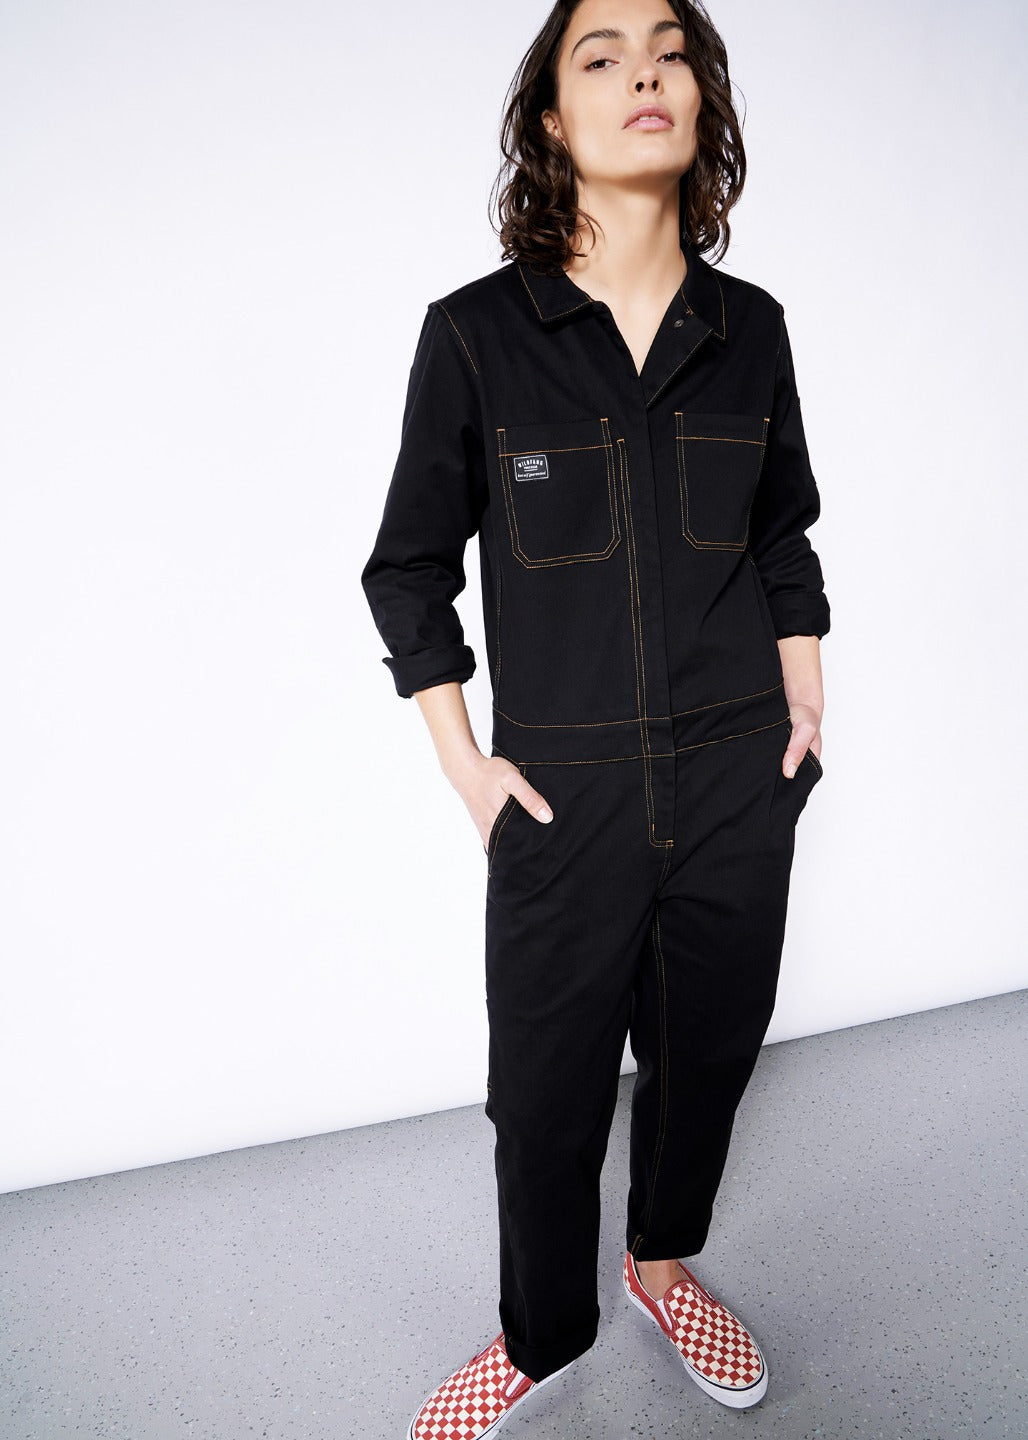 Model standing with hands in pockets, wearing black size small long sleeve coverall jumpsuit with orange pop-stitch detailing. Pant legs are rolled down and top button is un buttoned.